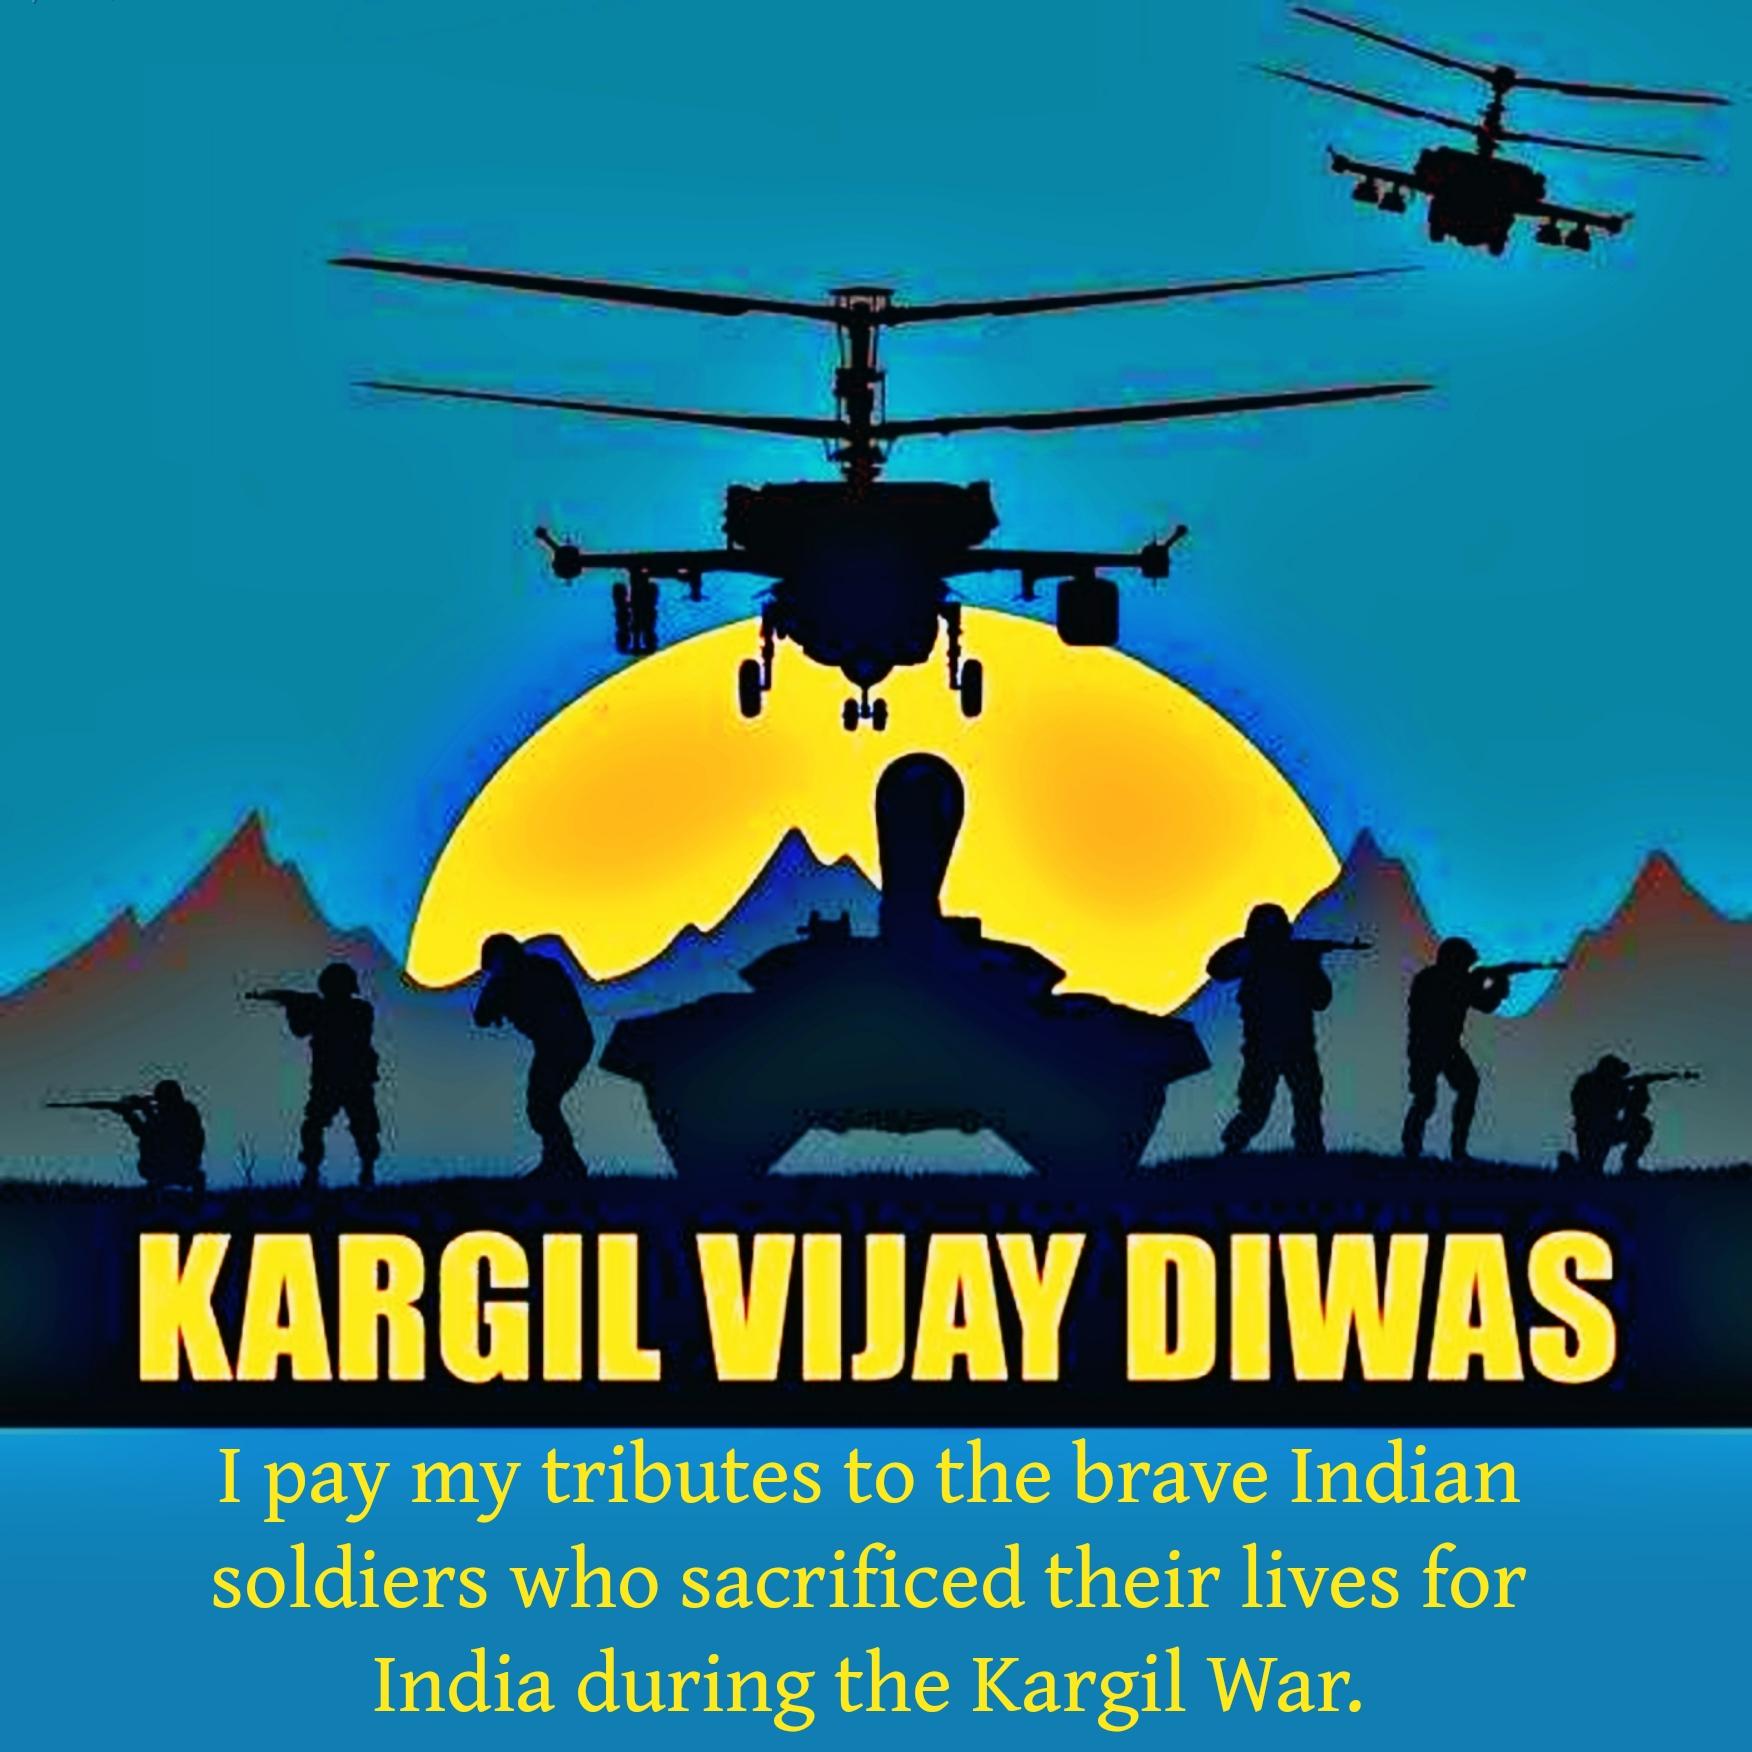 I pay my tributes to the brave Indian soldiers who sacrificed their lives